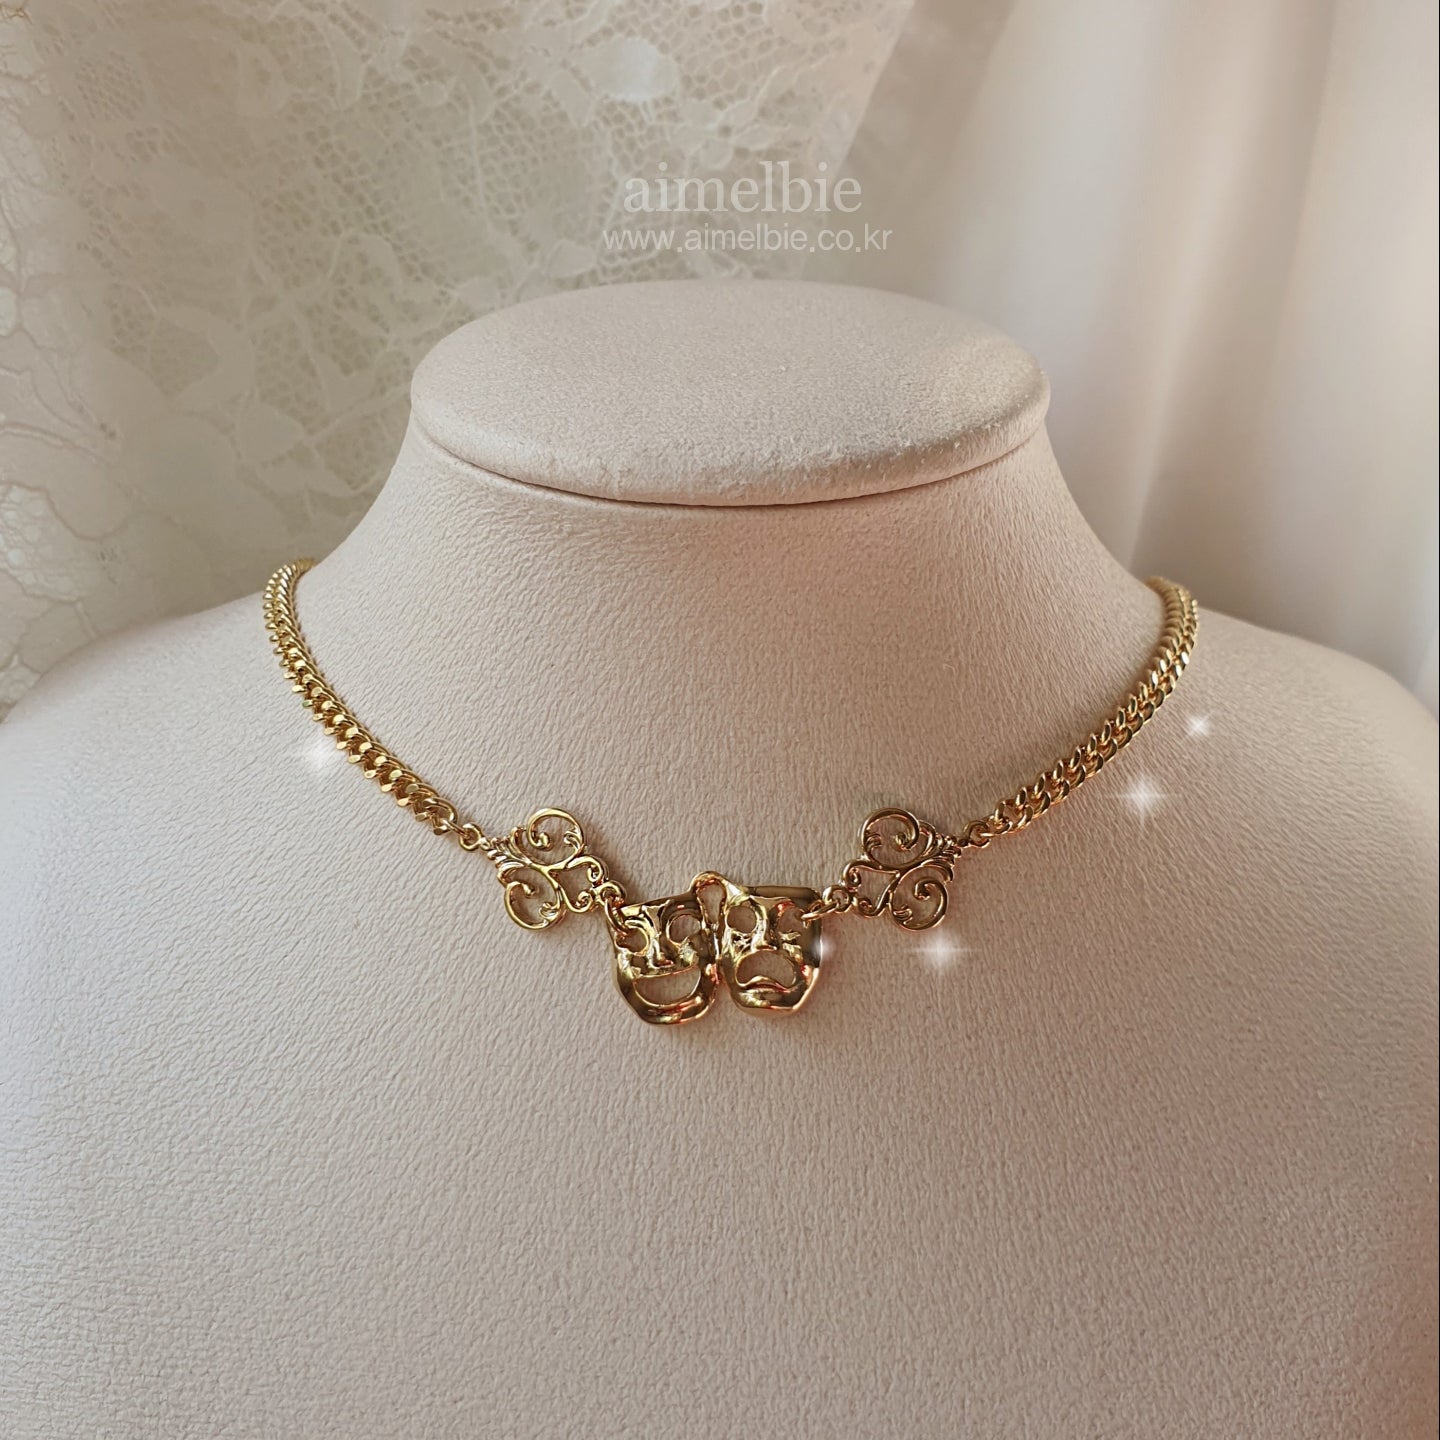 Theatre Mask Layered Necklace - Fancy version (Gold Color)